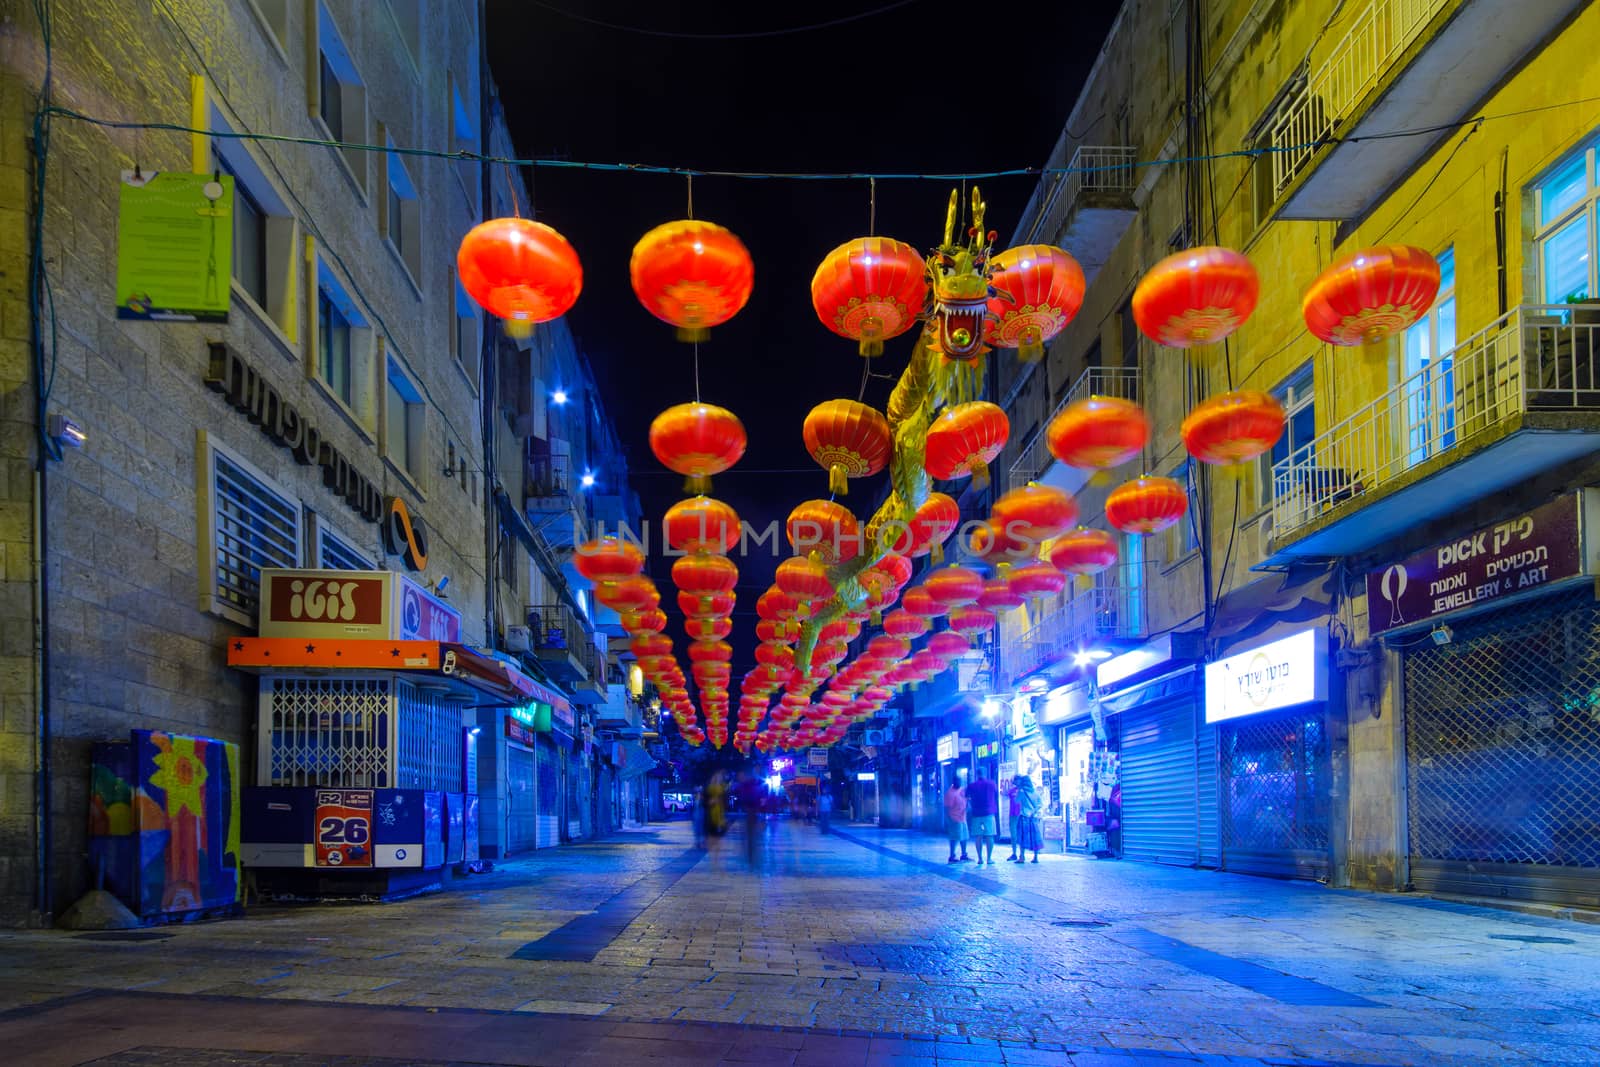 JERUSALEM, ISRAEL - SEPTEMBER 22, 2016: The Ben Hillel Street at night, with Chinese style decorations, locals and visitors, in Jerusalem, Israel